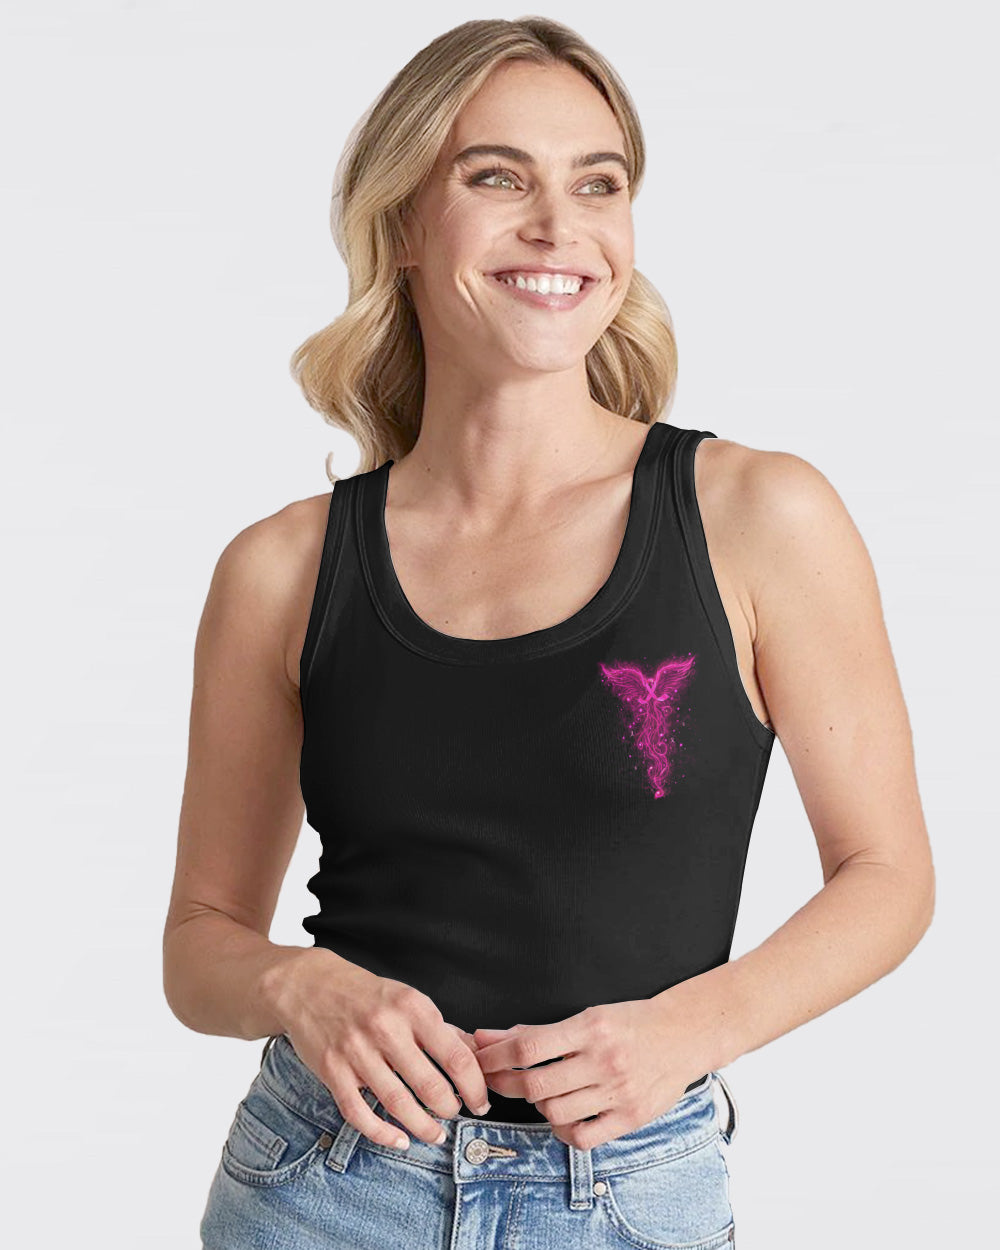 Never Give Up Phoenix Women's Breast Cancer Awareness Tanks